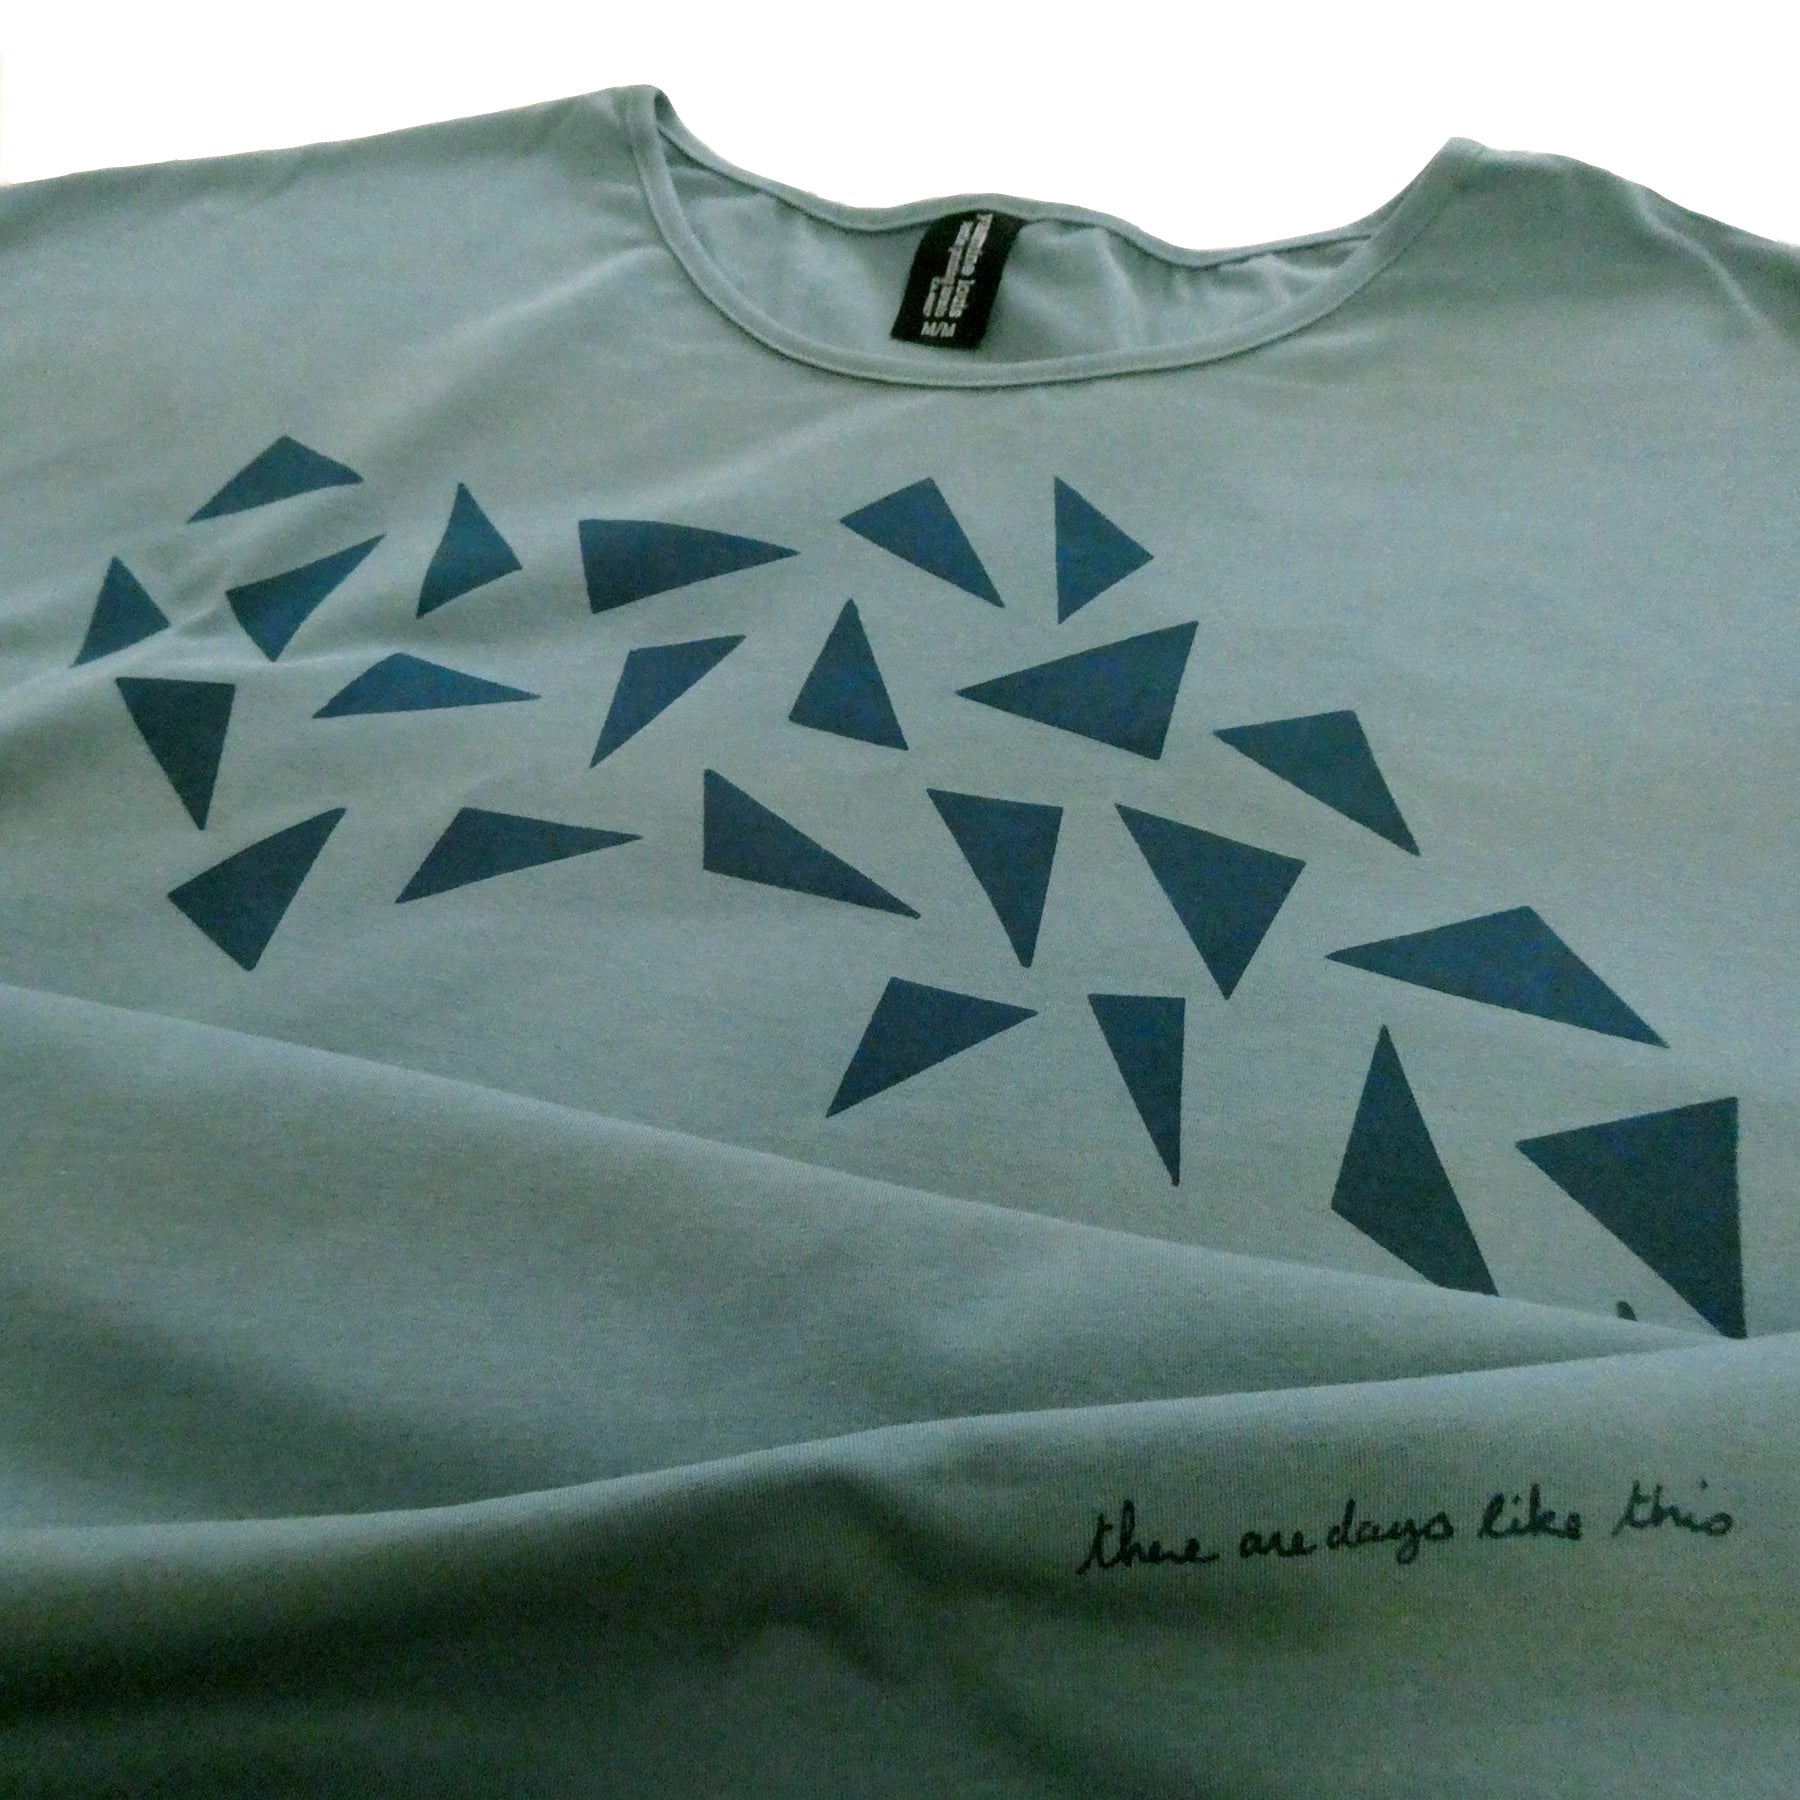 there are days like this (24 triangles / 24 hours) (S-L-XL left)